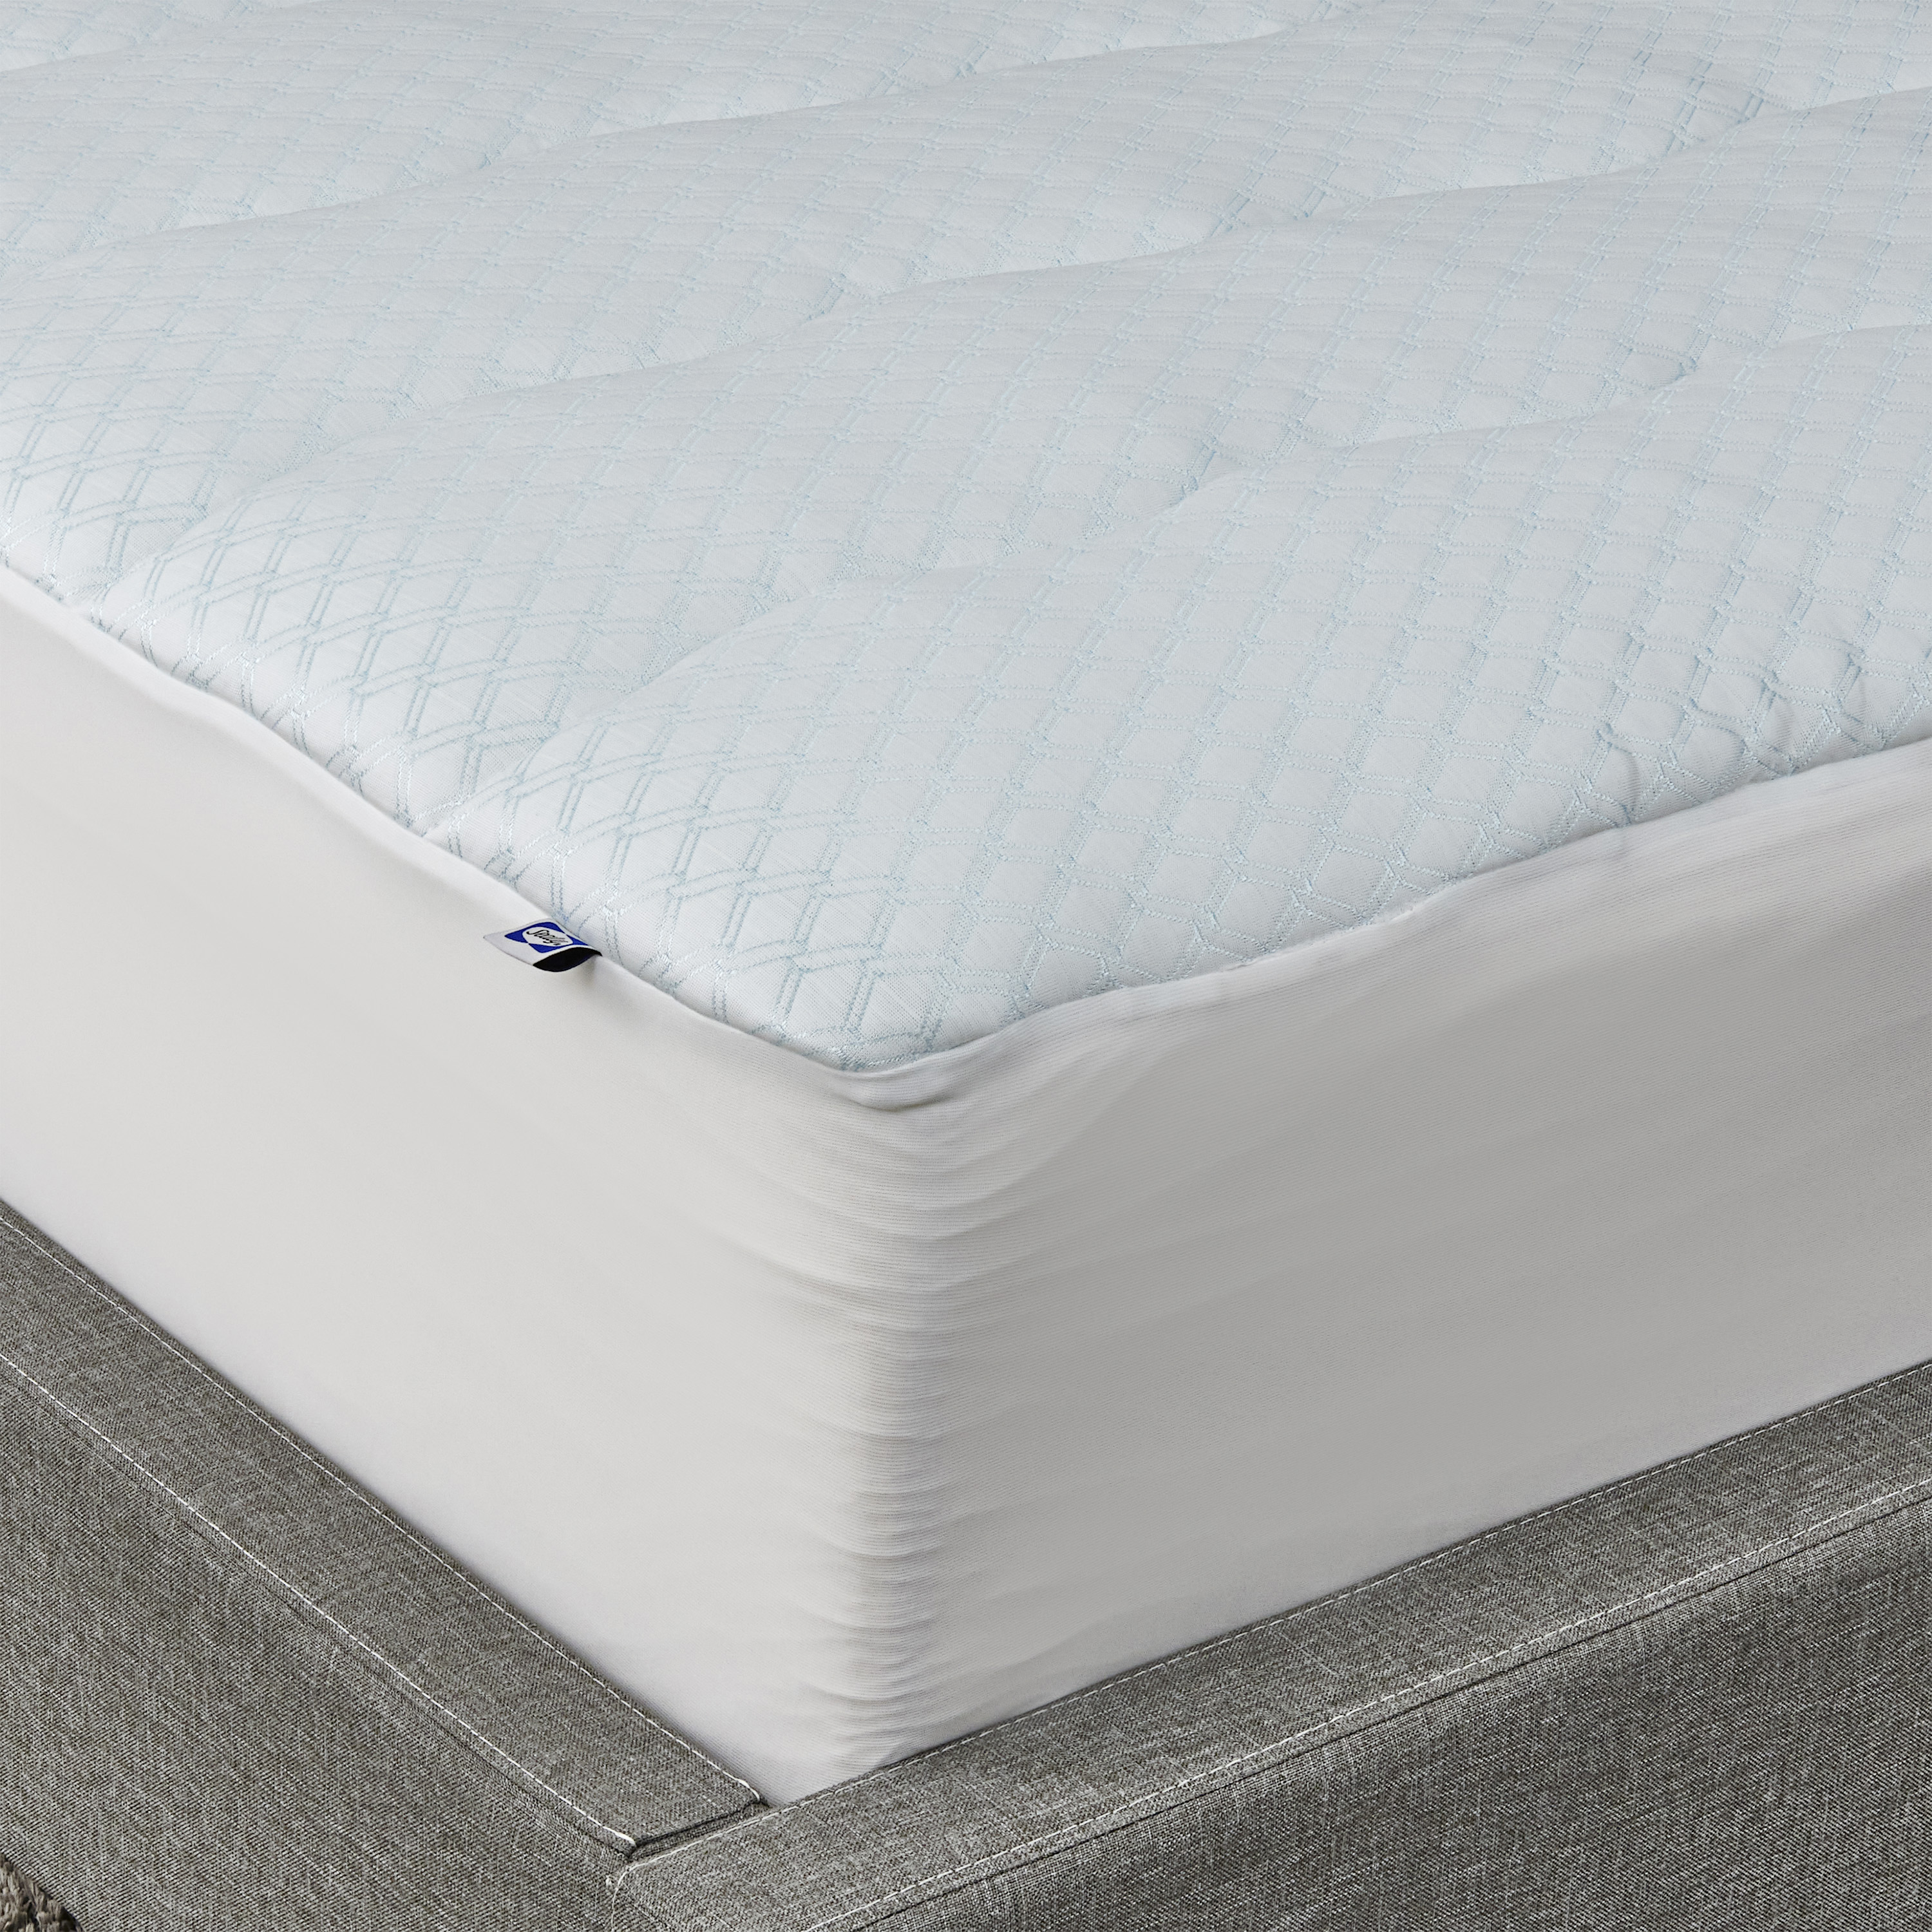 Sealy, Cooling Mattress Pad, Twin - image 5 of 6